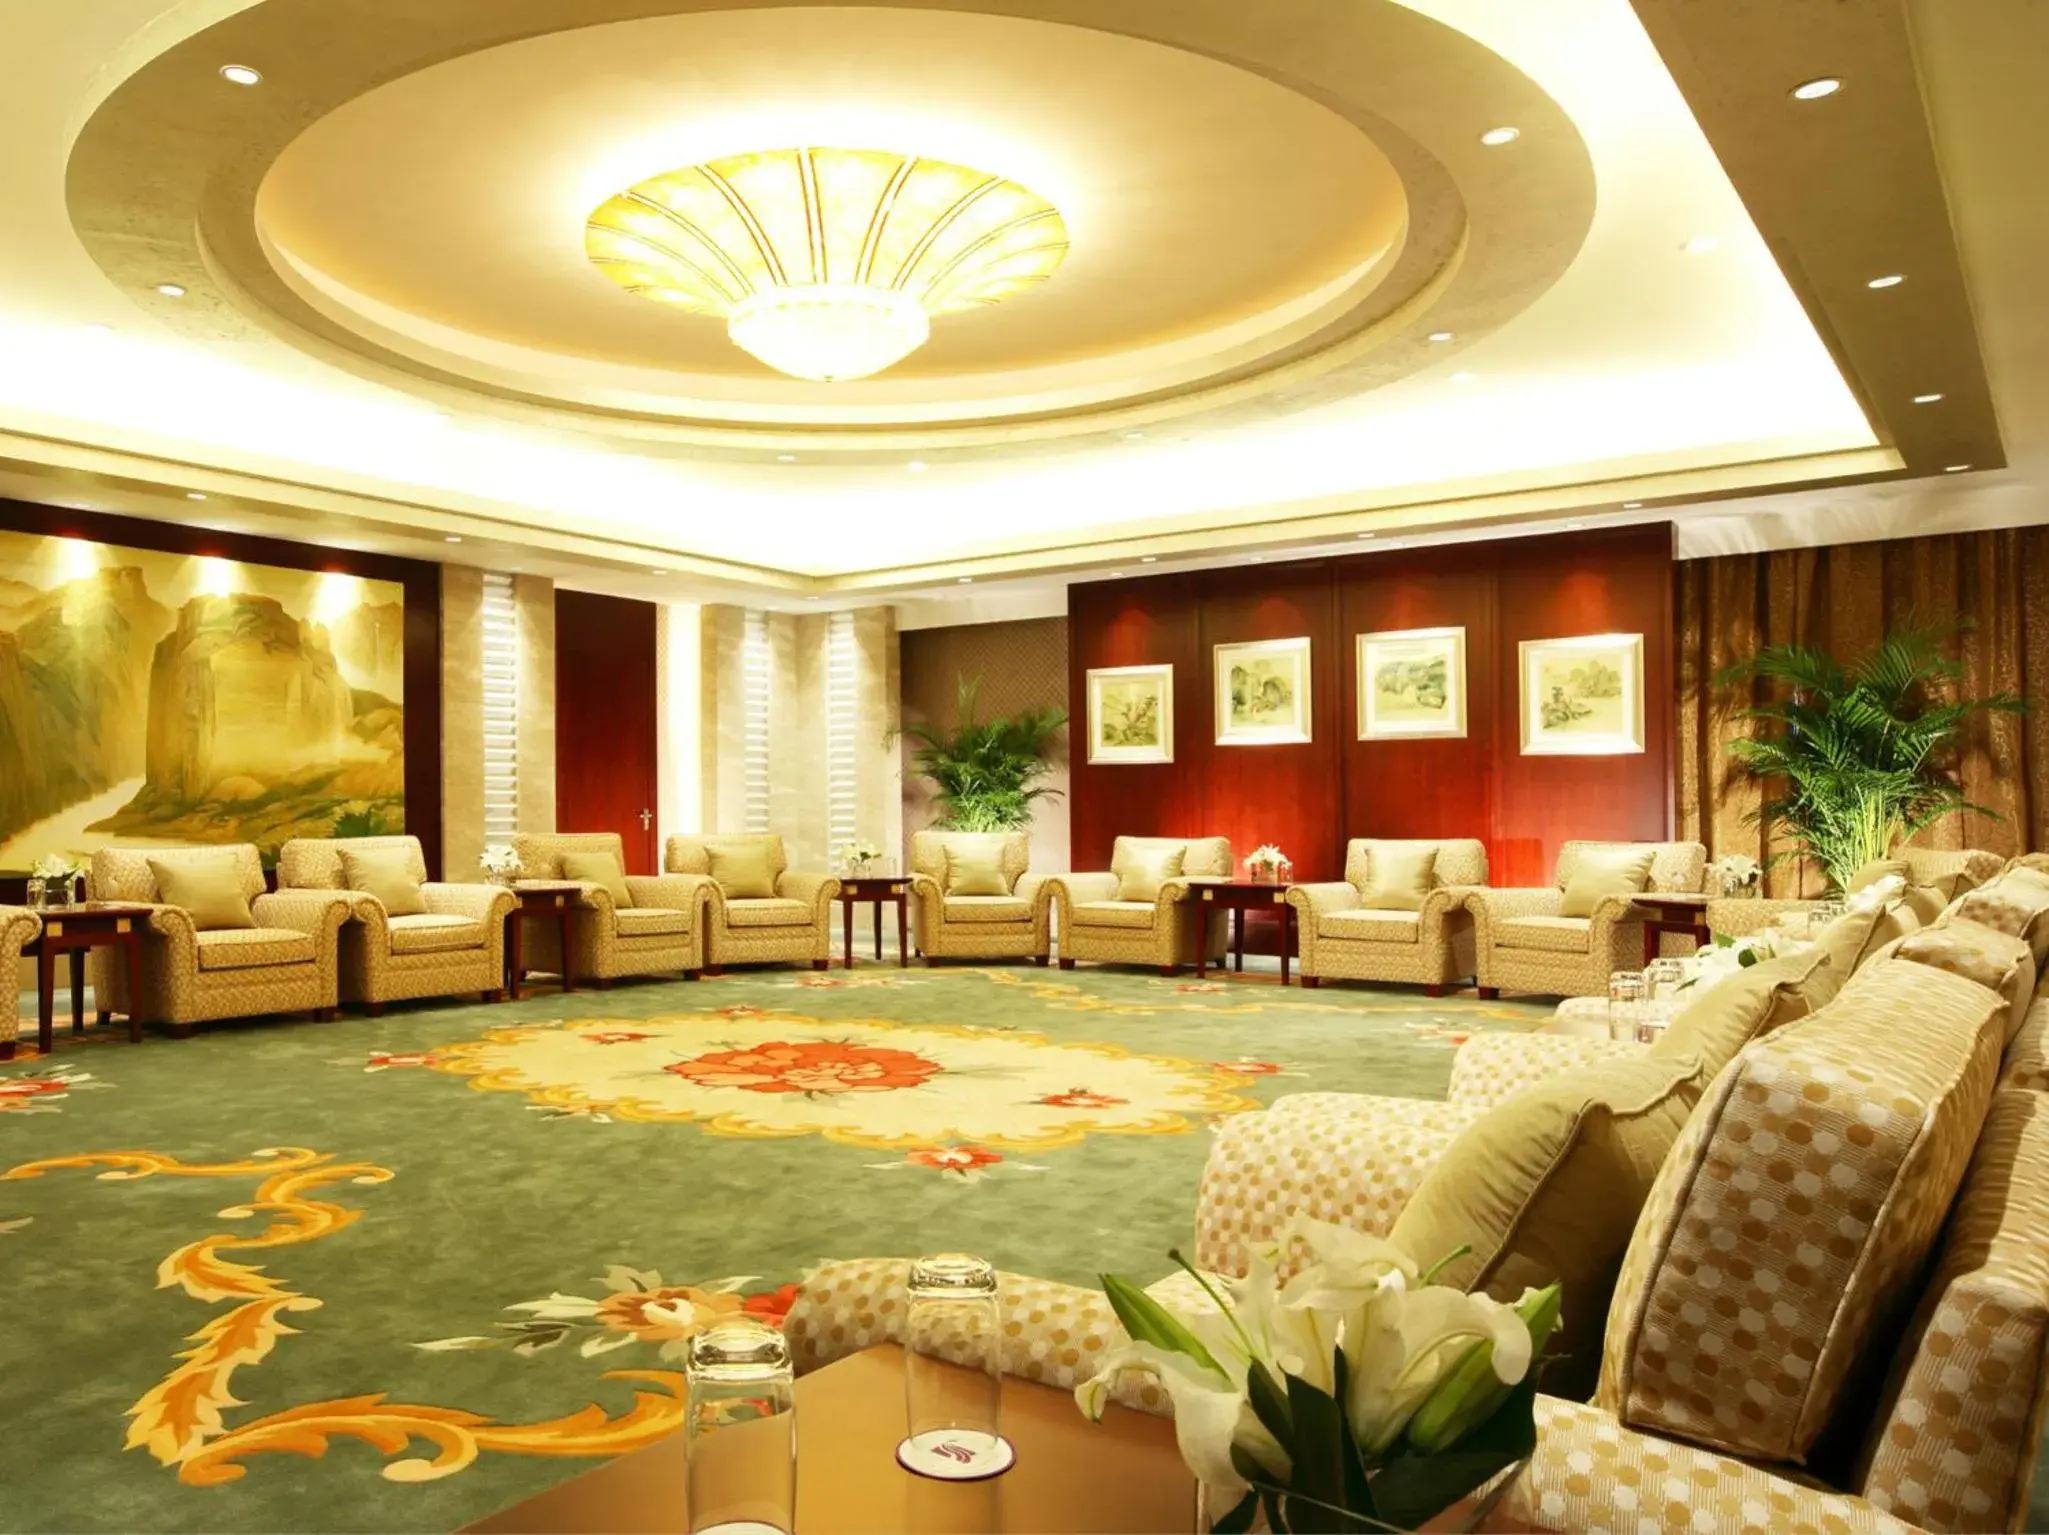 Meeting/conference room, Banquet Facilities in Tianjin Saixiang Hotel